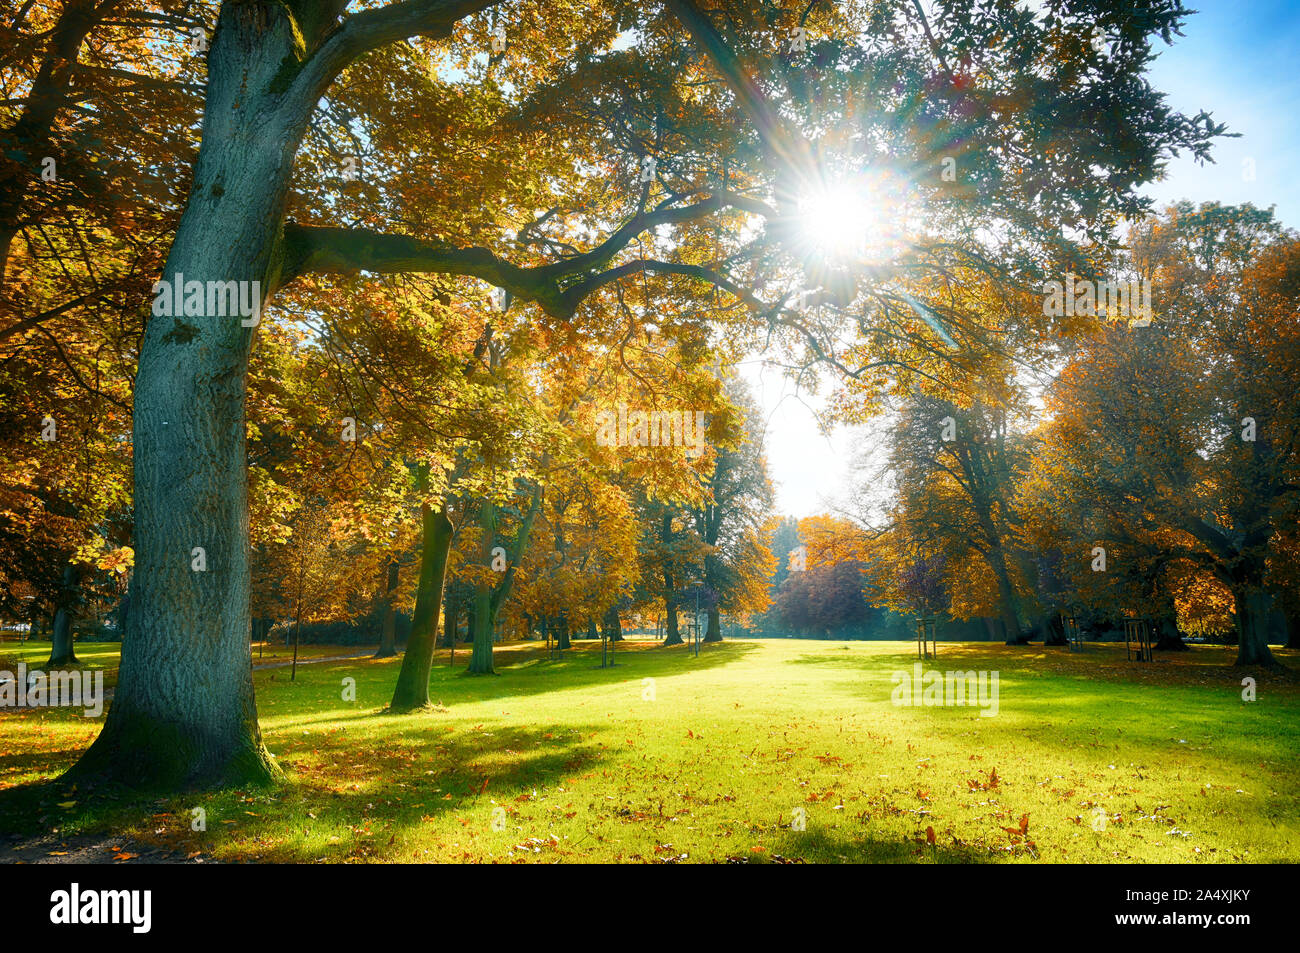 sun is shining through beautiful old trees with colorful autumn leaves in an old park, seasonal nature background Stock Photo